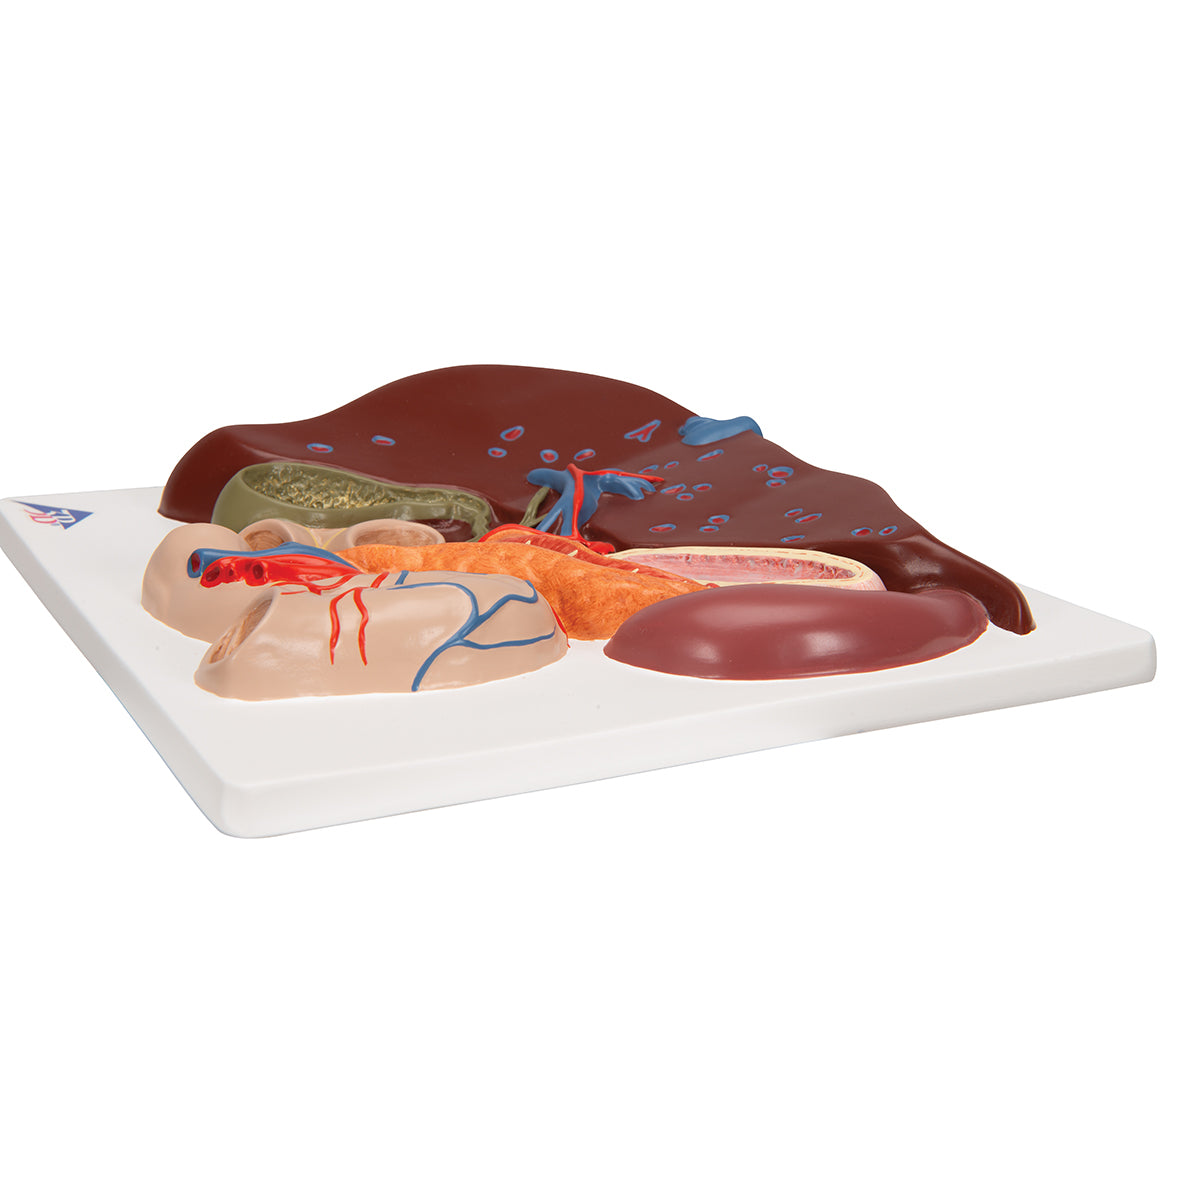 Model of the liver, gallbladder, bile ducts and related organs